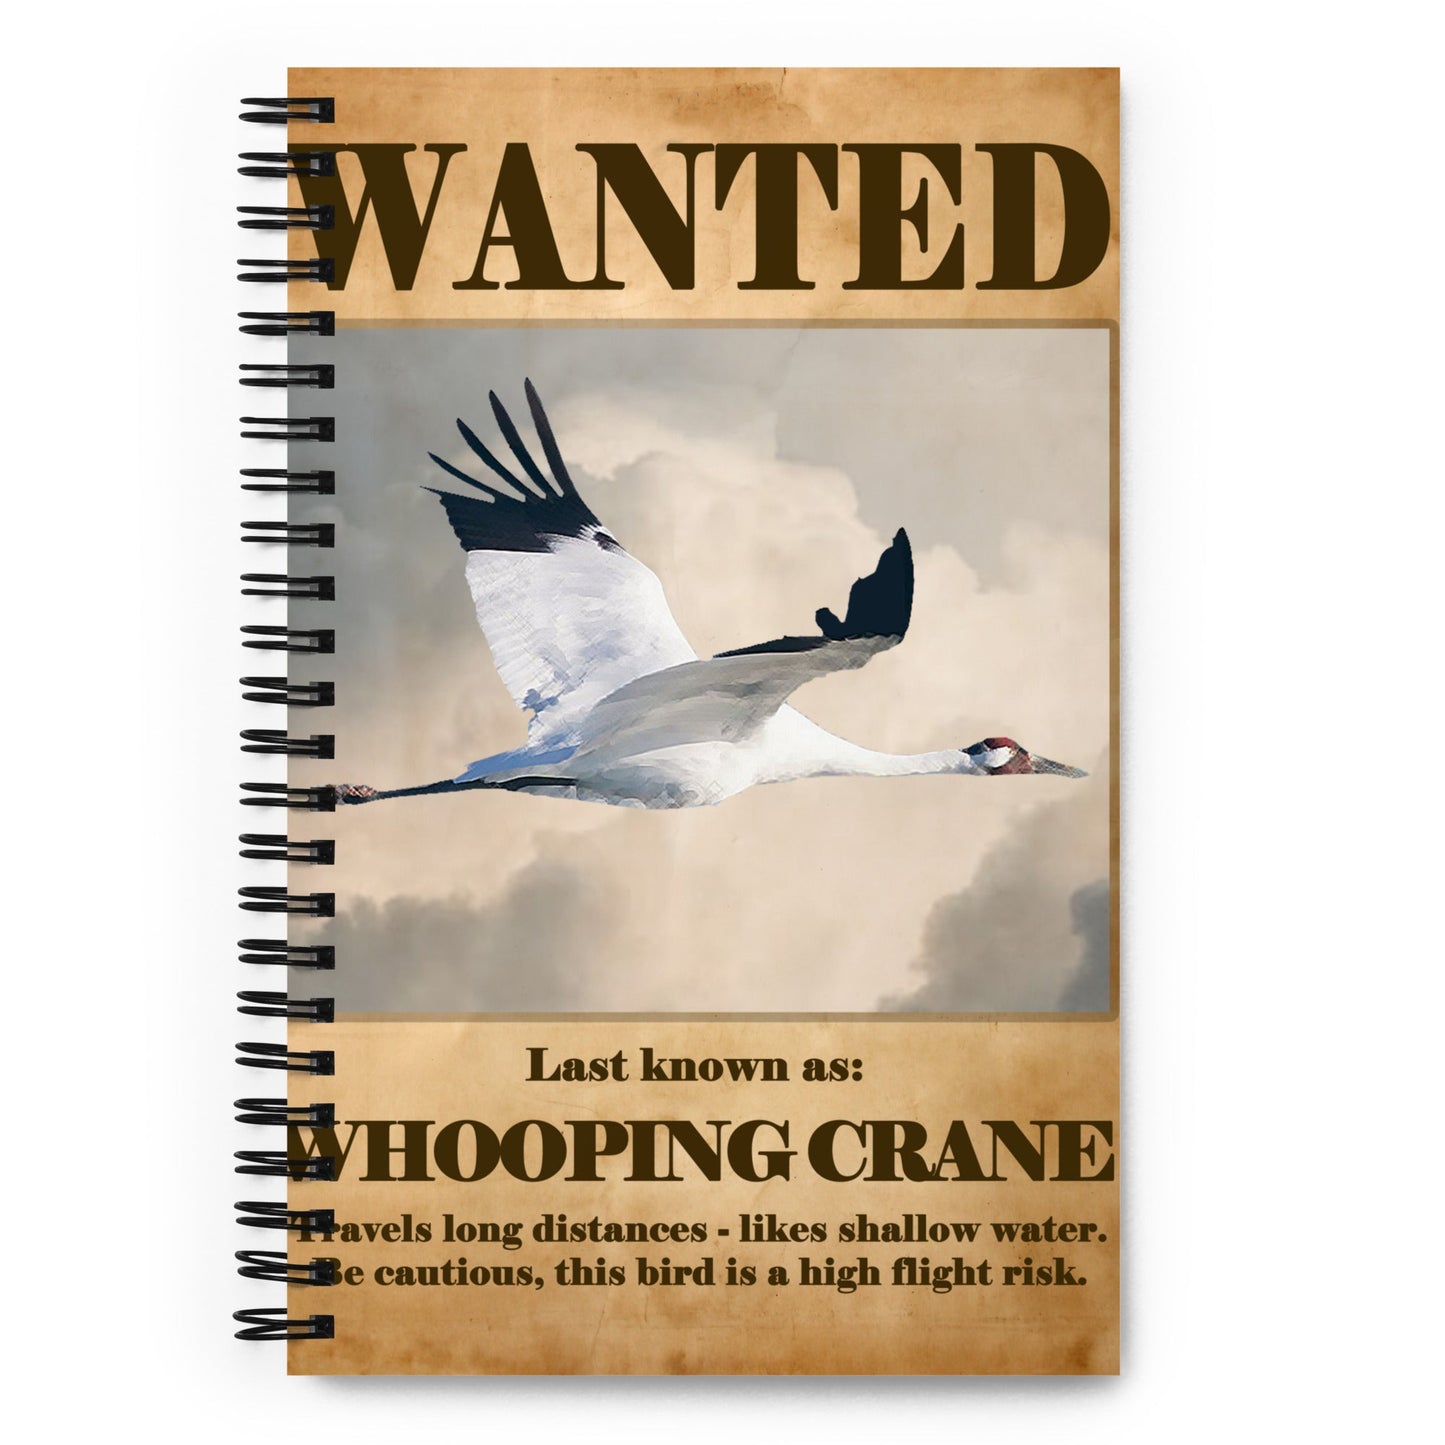 Wanted: Whooping Crane Spiral Notebook